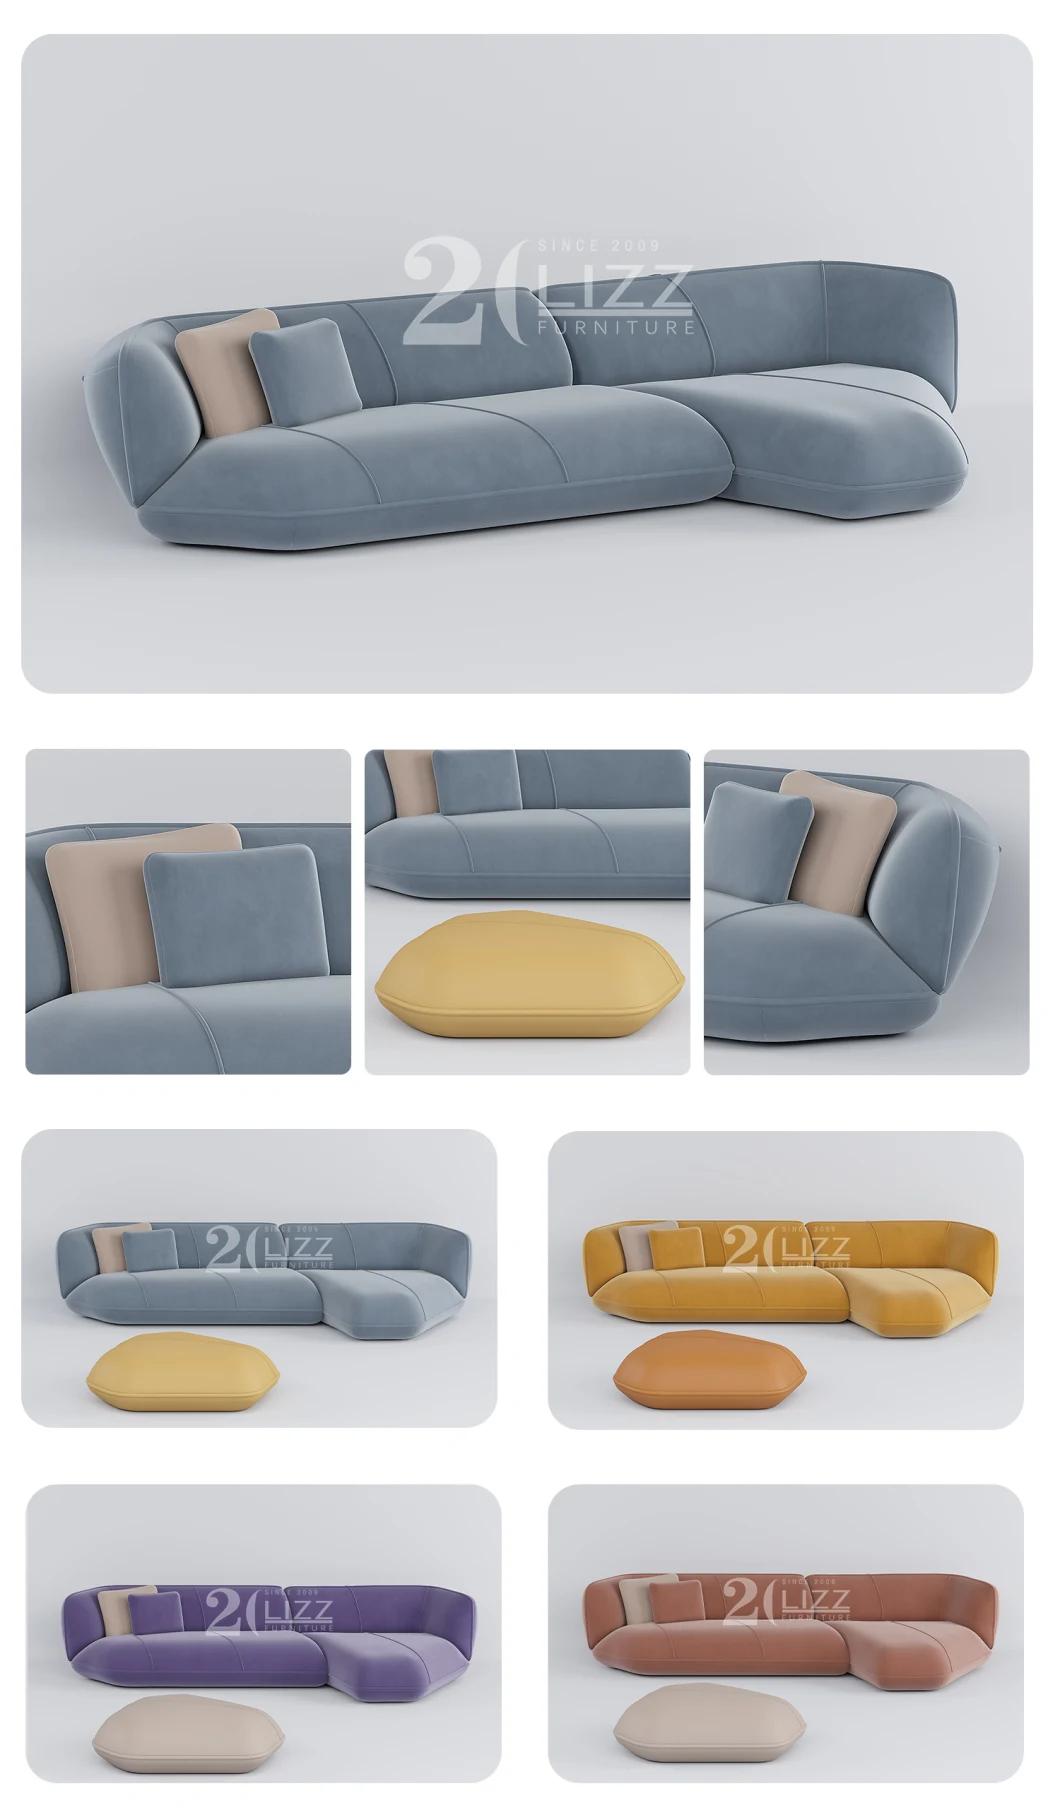 Italian Original Minimalist Design Fabric Couch Living Room Sofa with Round Ottoman for Home Furniture